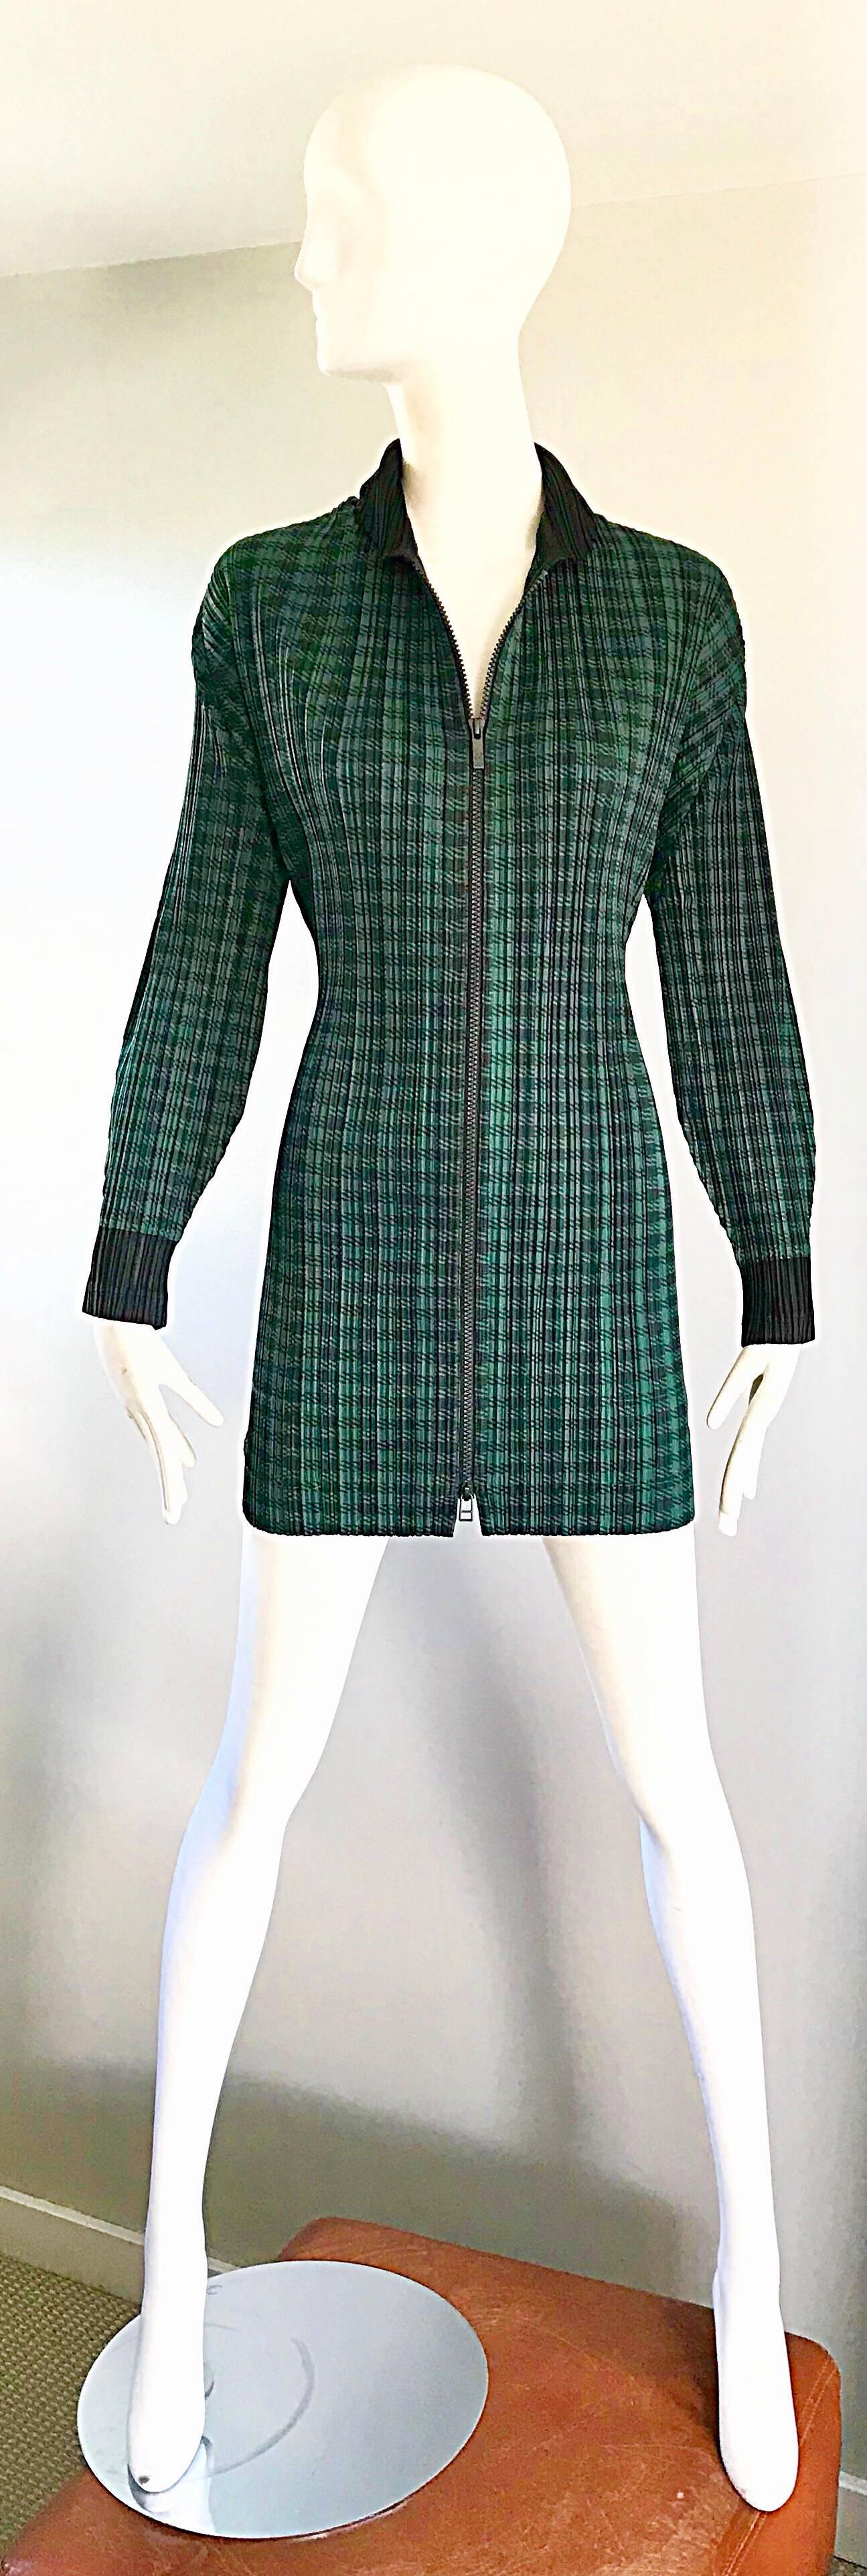 Amazing 1990s ISSEY MIYAKE PLEATS PLEASE larger size green and black checkered jacket OR mini dress! Features signature micro pleats that allow stretch to fit. Black zipper up the front. Can easily be worn as either a jacket or a dress. Great belted